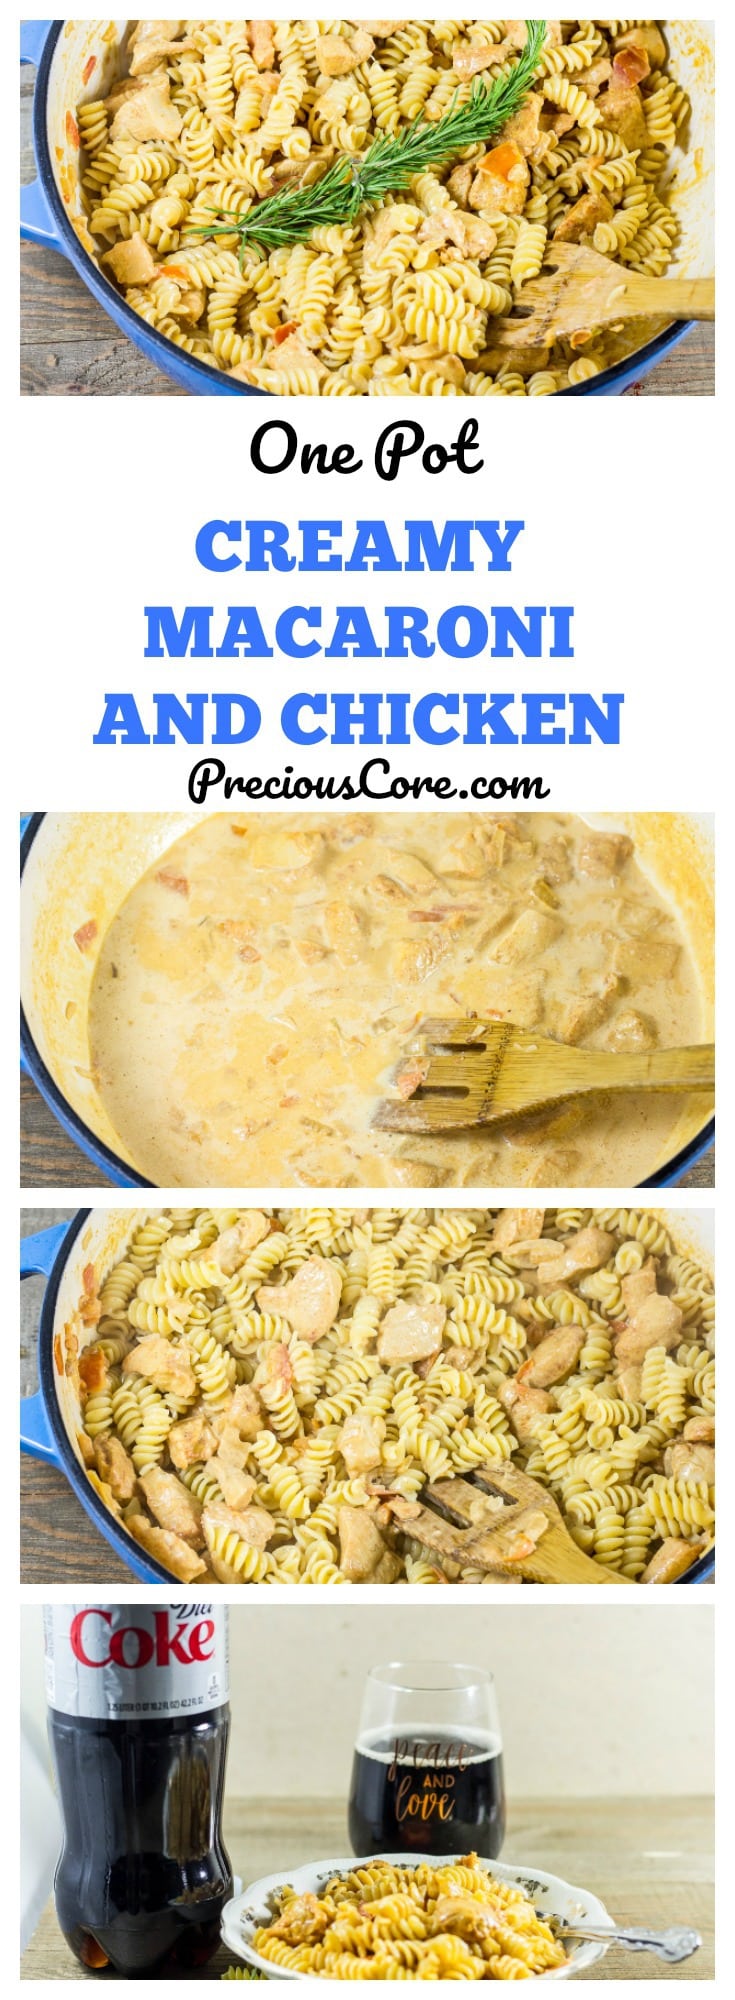 This one pot creamy macaroni and chicken is literally the easiest dinner ever. Only 30 minutes and you have a wholesome meal right before you. Get the recipe on PreciousCore.com. #Dinner #OnePotMeals #HolidayMealSolutions #Ad